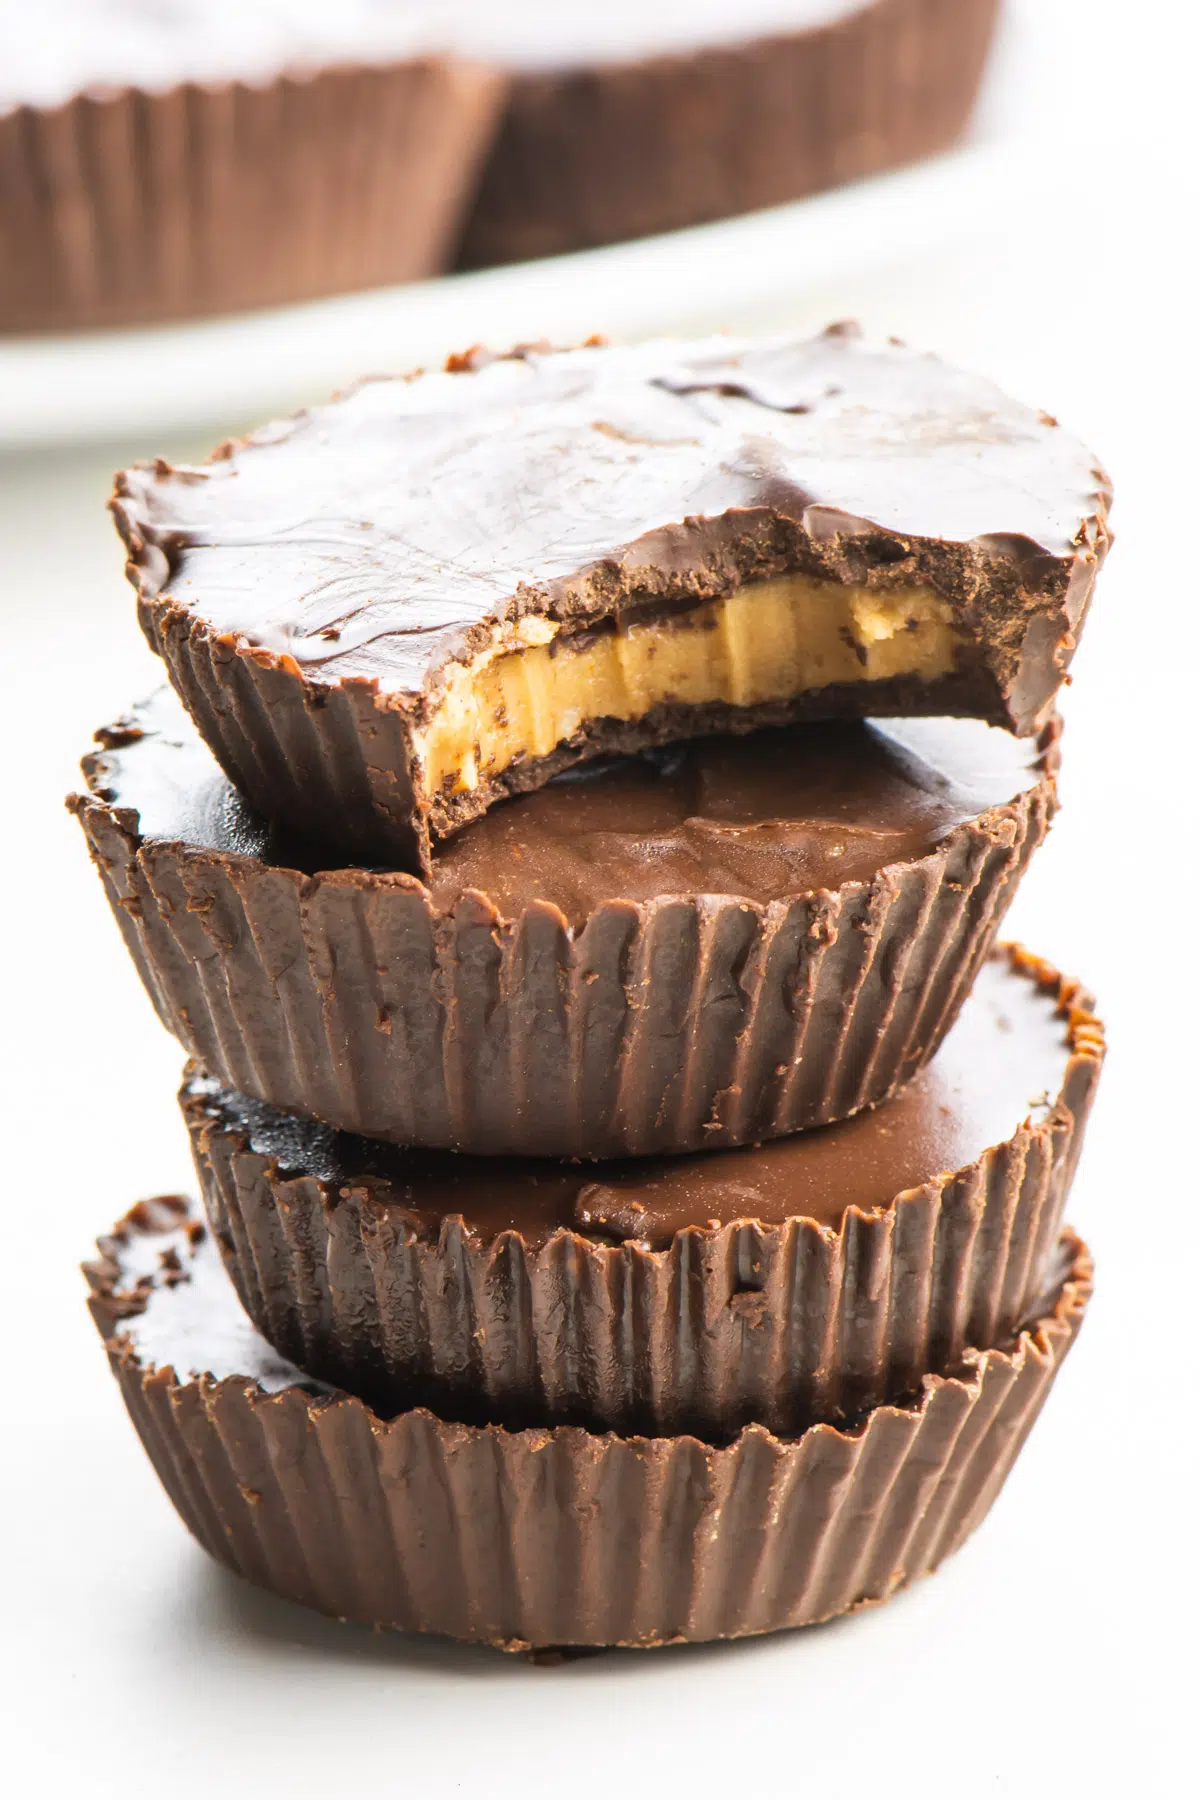 A stack of several vegan peanut butter cups, the top one with a bite taken out.